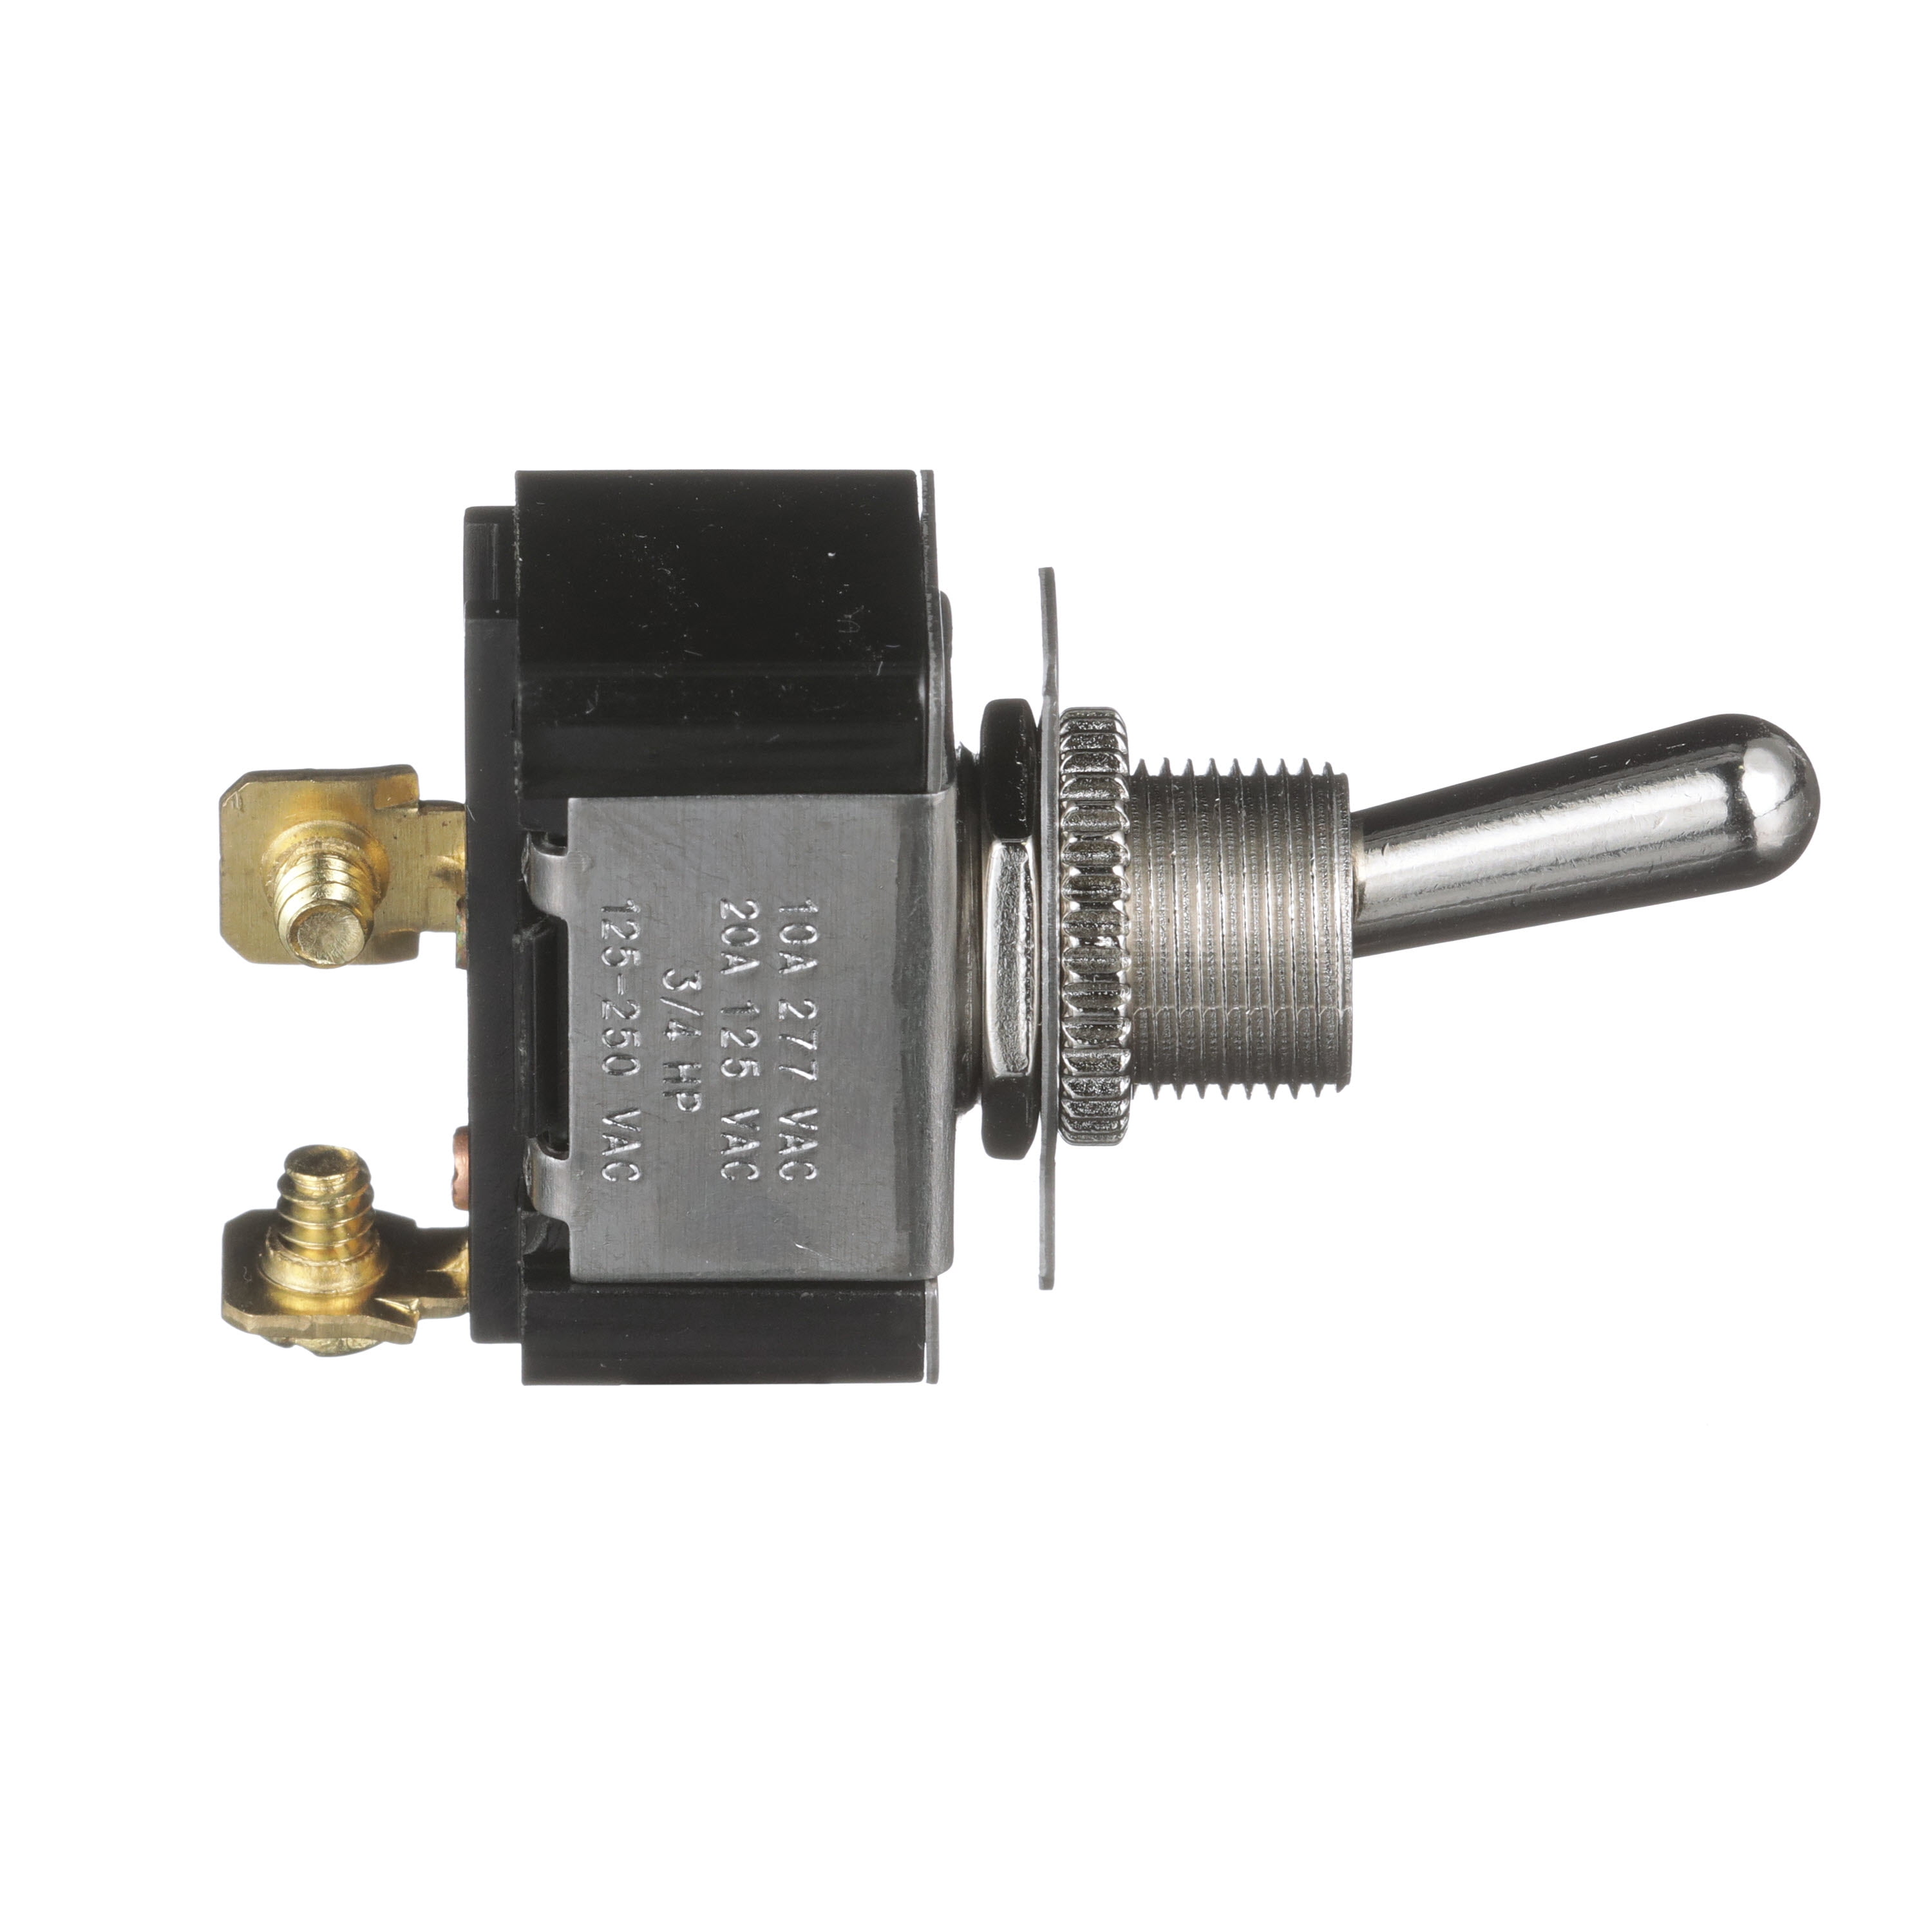 Pollak 34-580 Momentary On-Off-Momentary On 6-Screw Toggle Switch 34-580L 